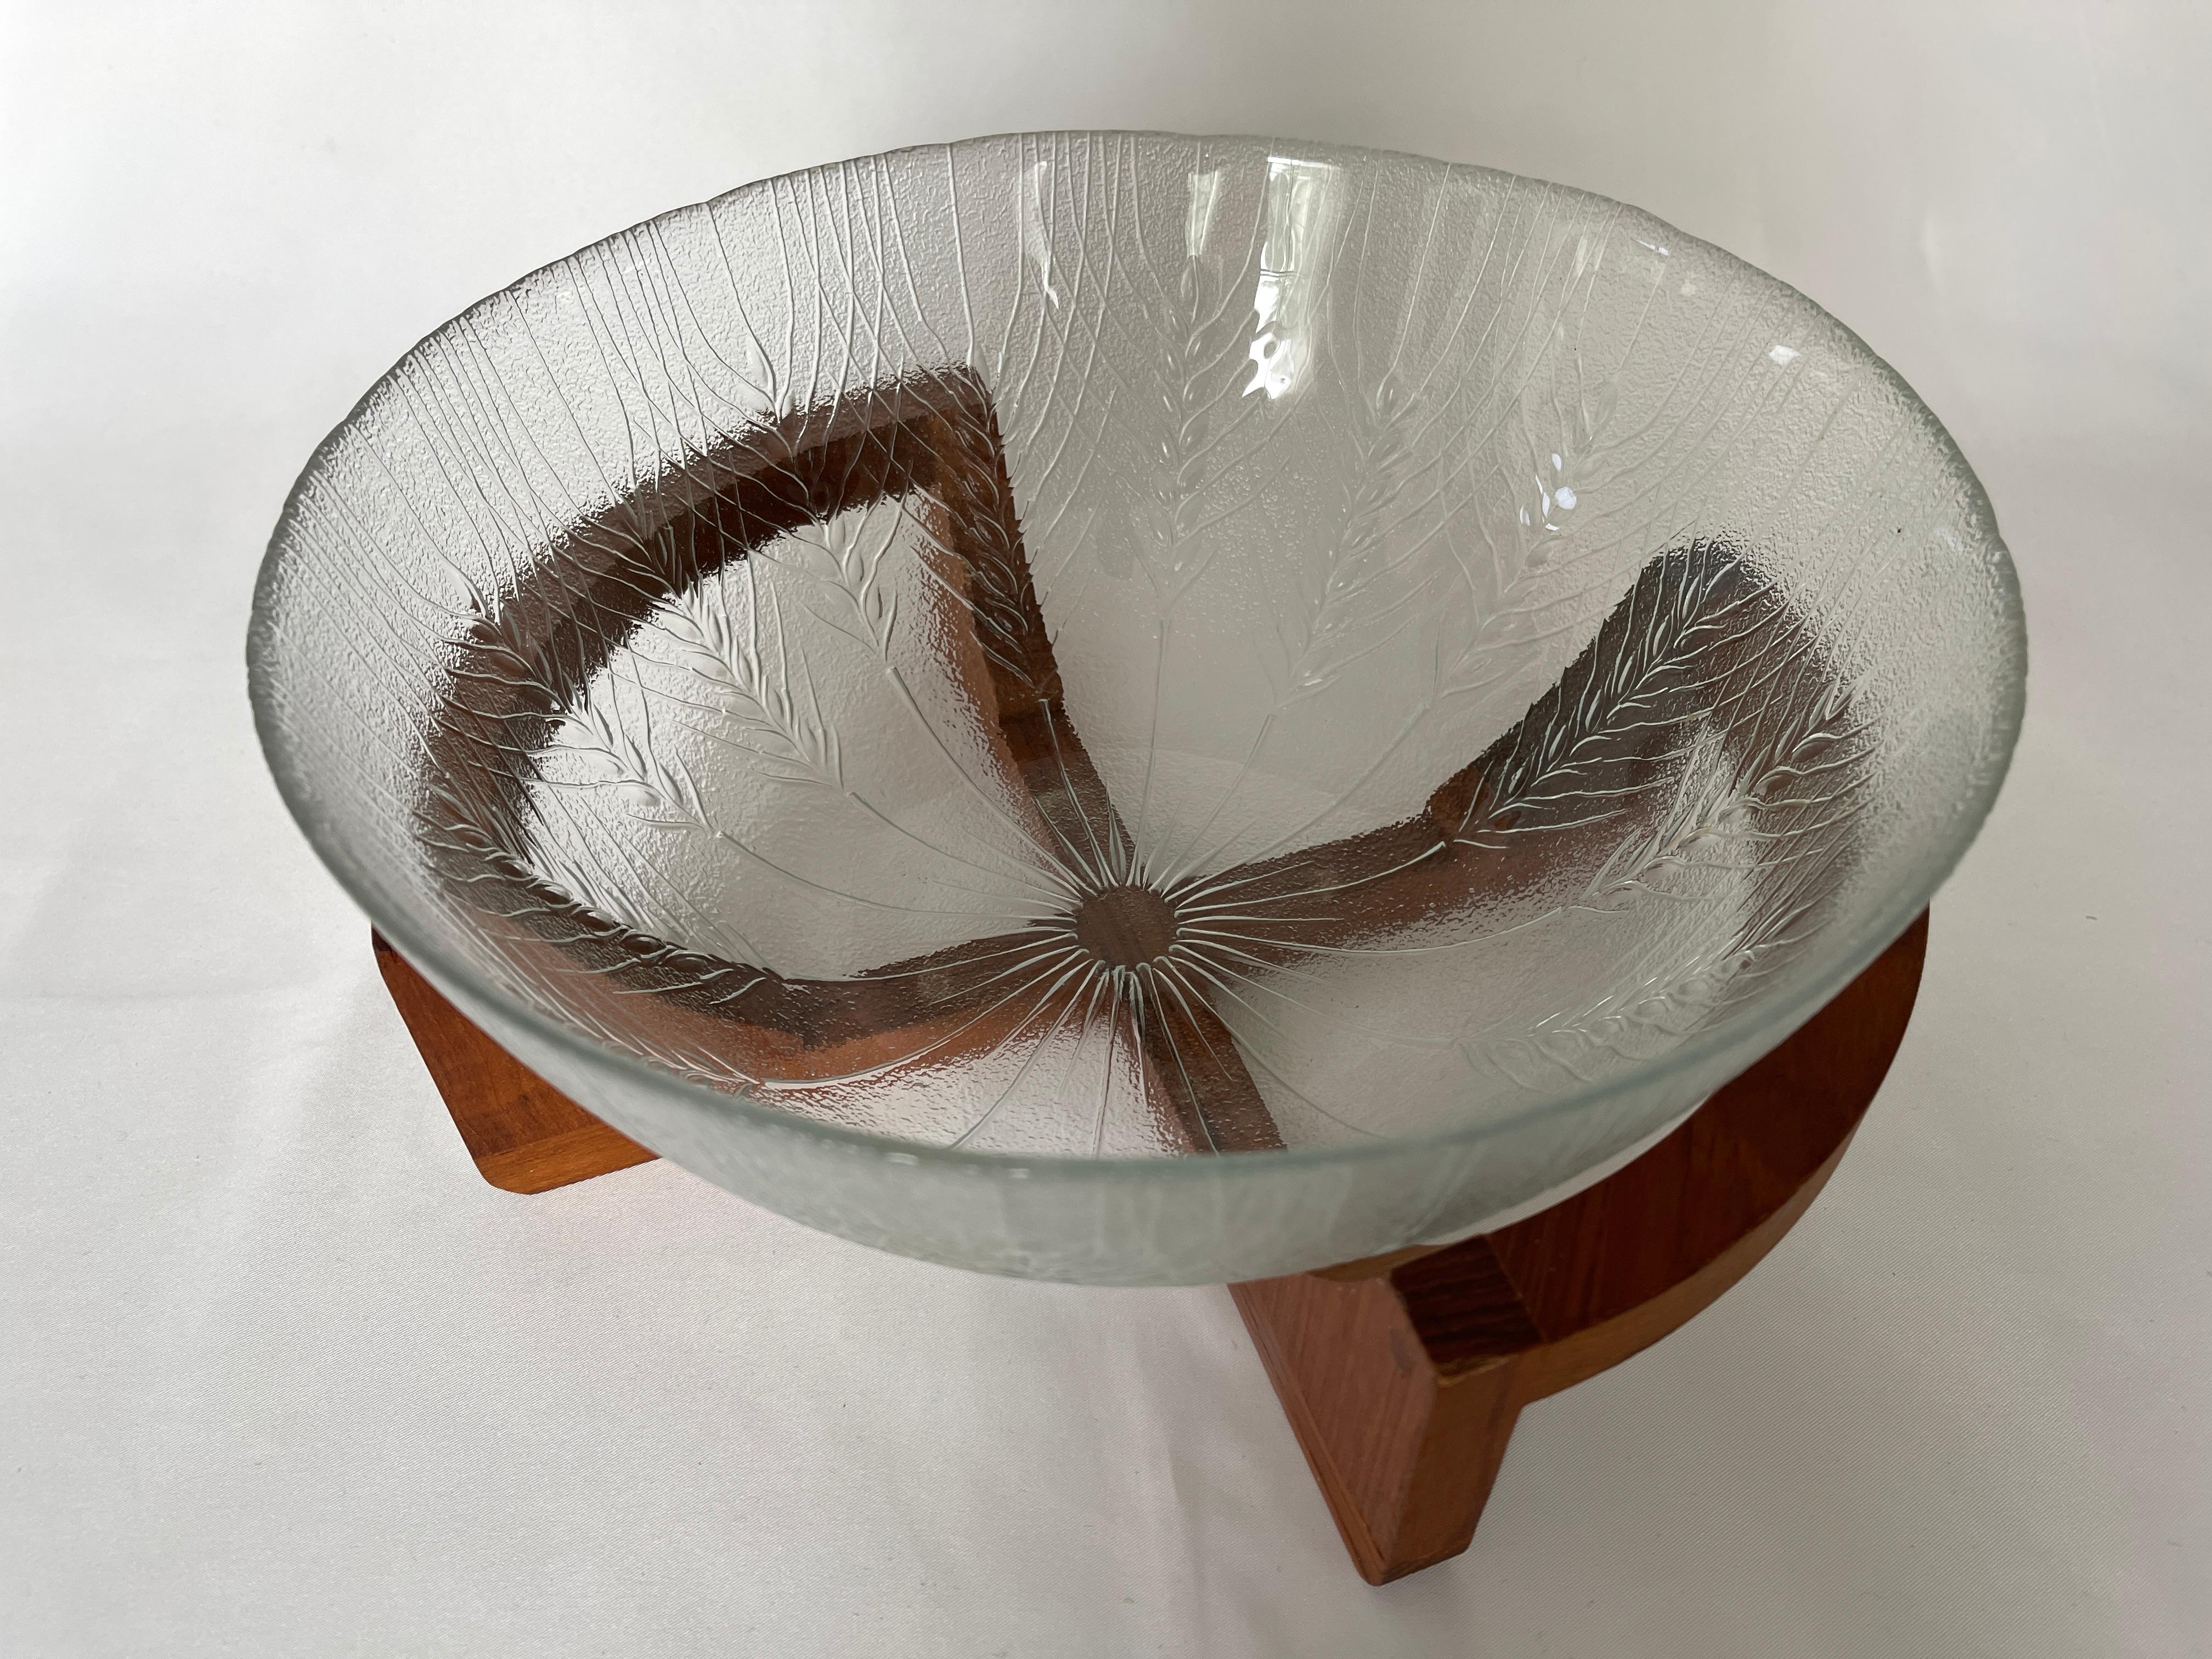 20th Century Danish Glass Salad Serving Bowl on Curved Teak Wood Stand For Sale